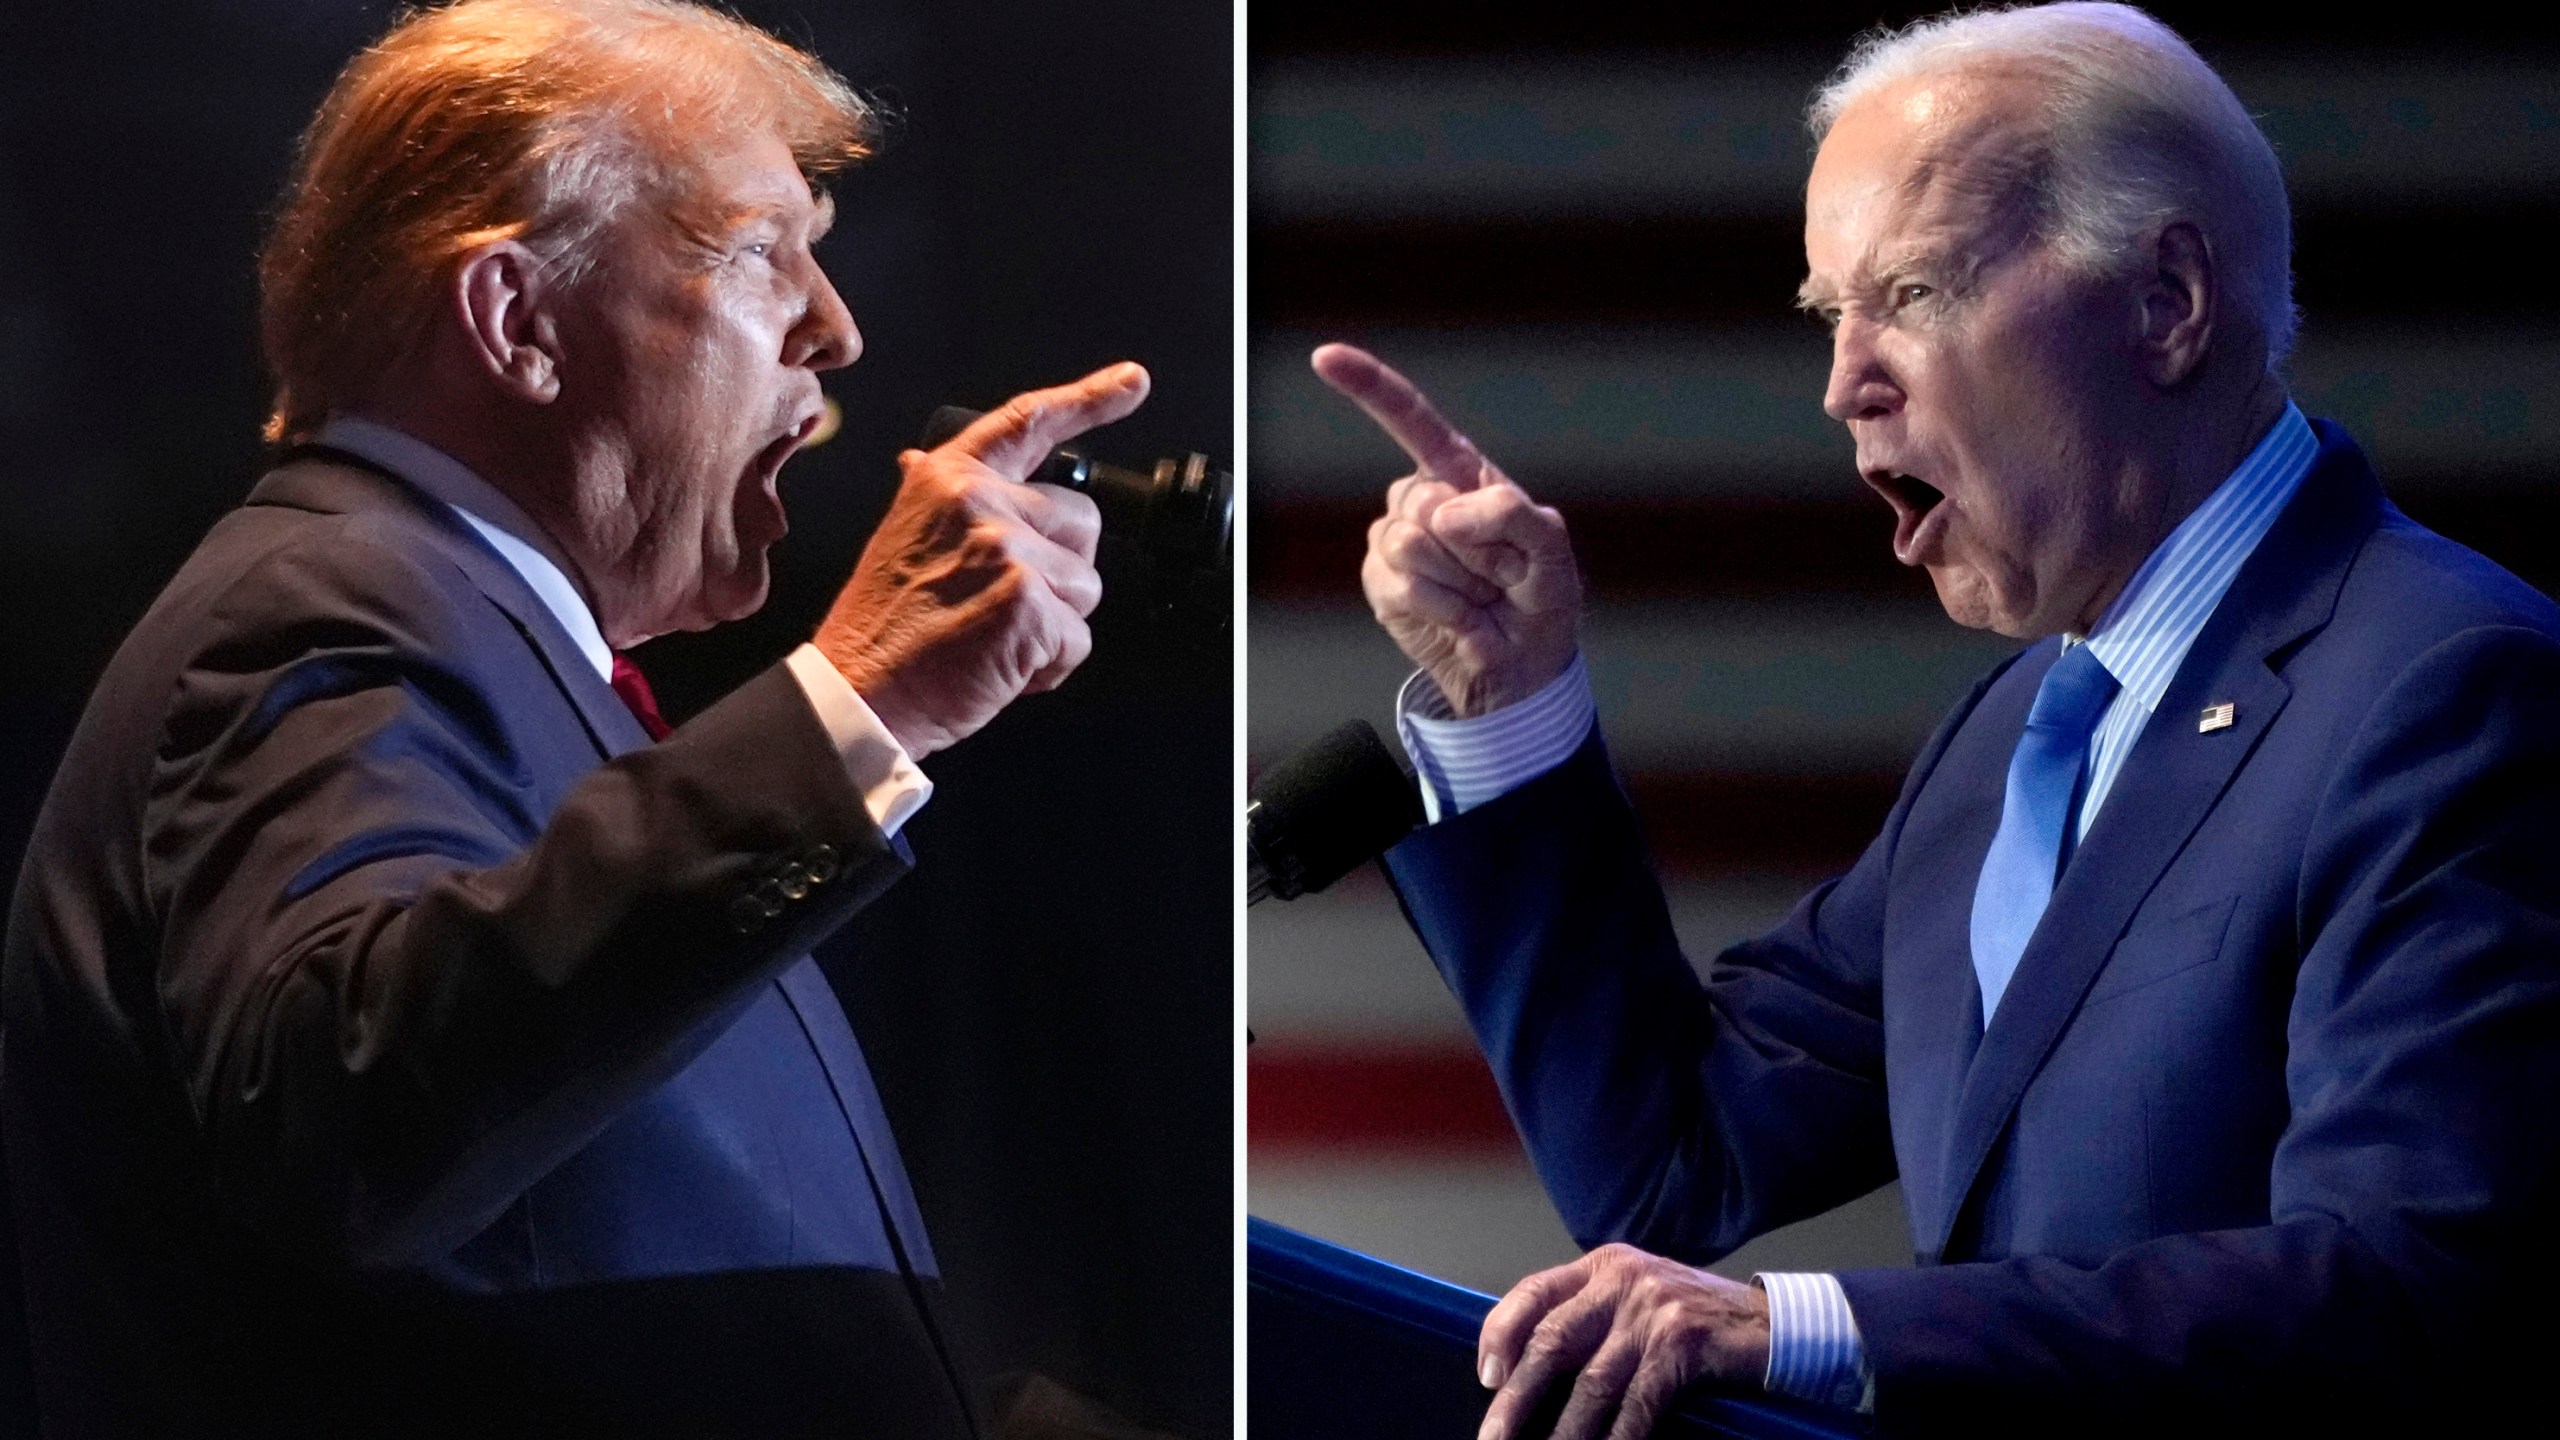 This combination of photos taken in Columbia, S.C. shows former President Donald Trump, left, on Feb. 24, 2024, and President Joe Biden on Jan. 27, 2024. Biden and Trump each won the White House by razor-thin margins in key states. Now, with a rematch of their bitter 2020 campaign all but officially set after Super Tuesday, the two campaigns are unveiling their strategies for an unprecedented matchup between a president and his immediate predecessor. (AP Photo)